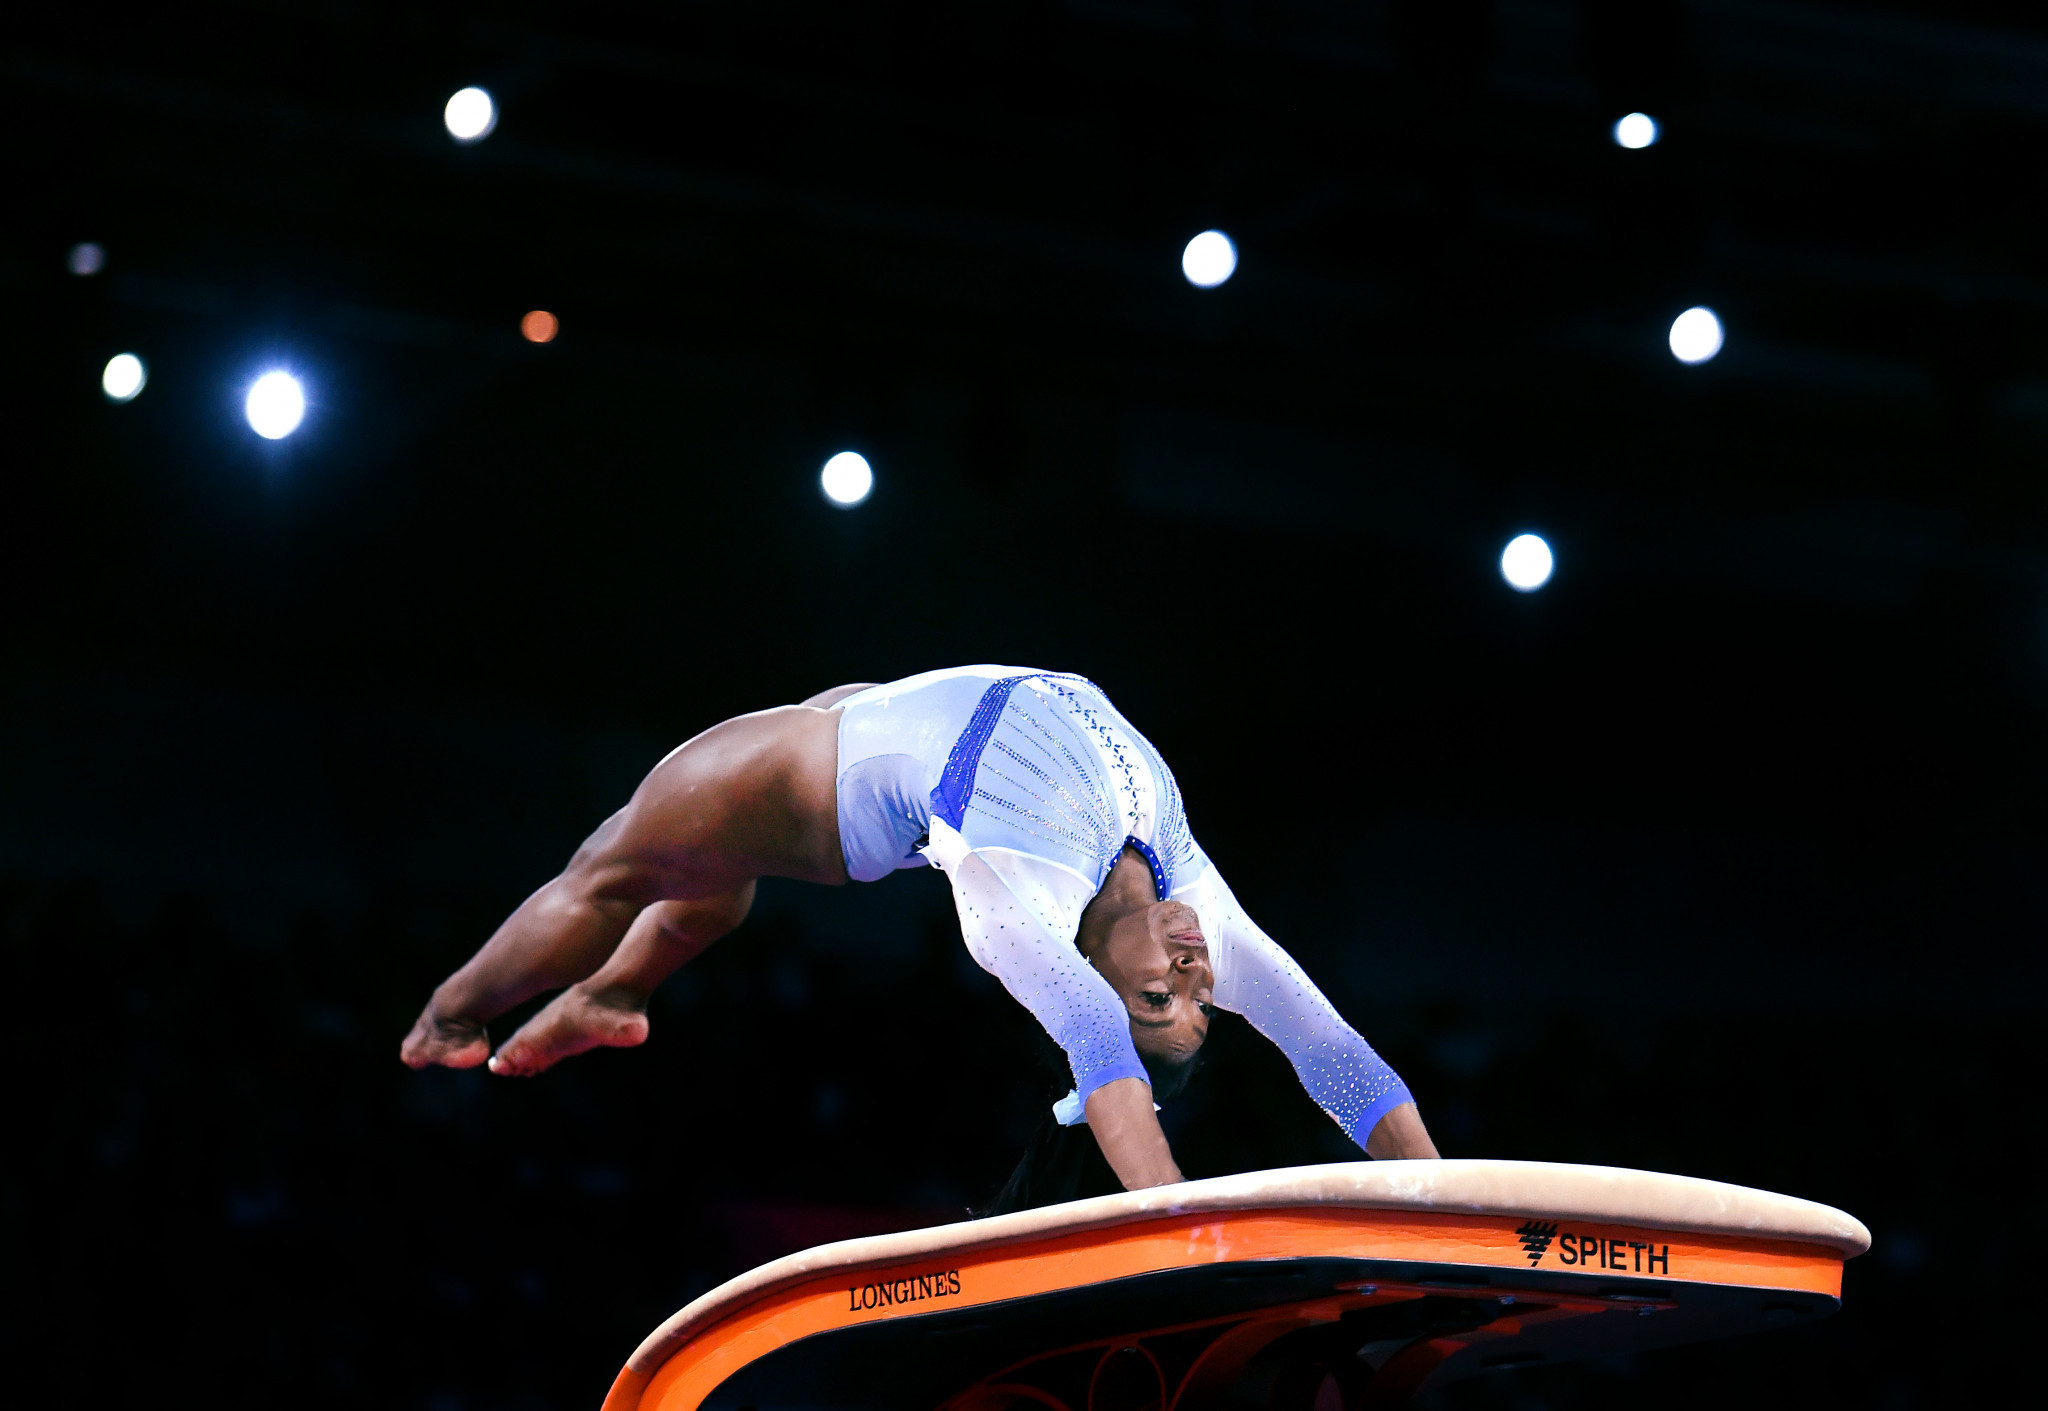 America's Simone Biles starred in qualification at the Artistic Gymnastics World Championships in Stuttgart©Getty Images